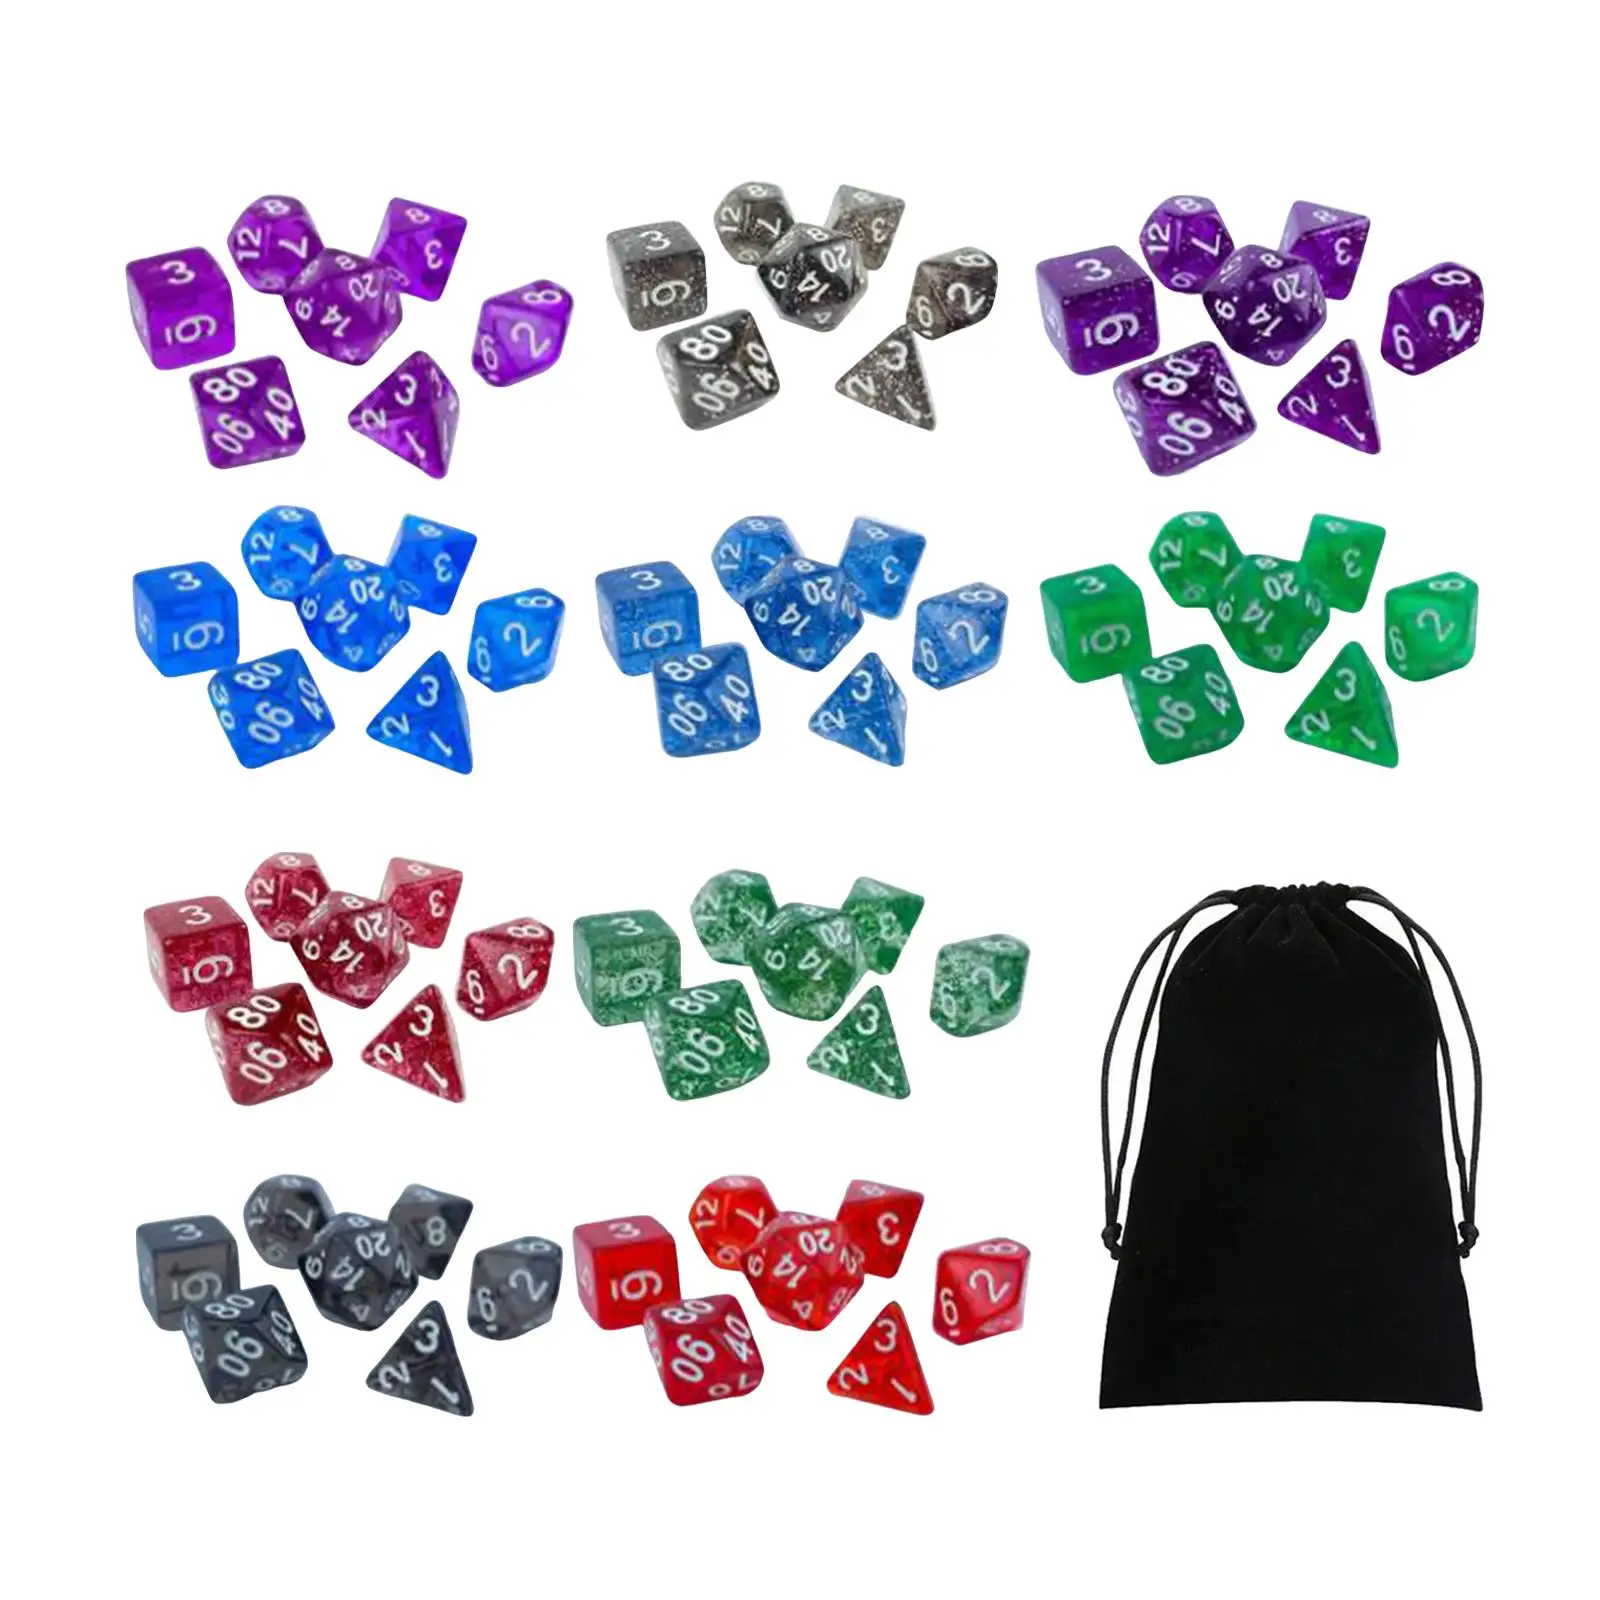 70Pcs Acrylic Polyhedral Dice Set Entertainment Toy Game Props with Storage Bag Dice Dice Sets for D10 D6 D20 D4 D8